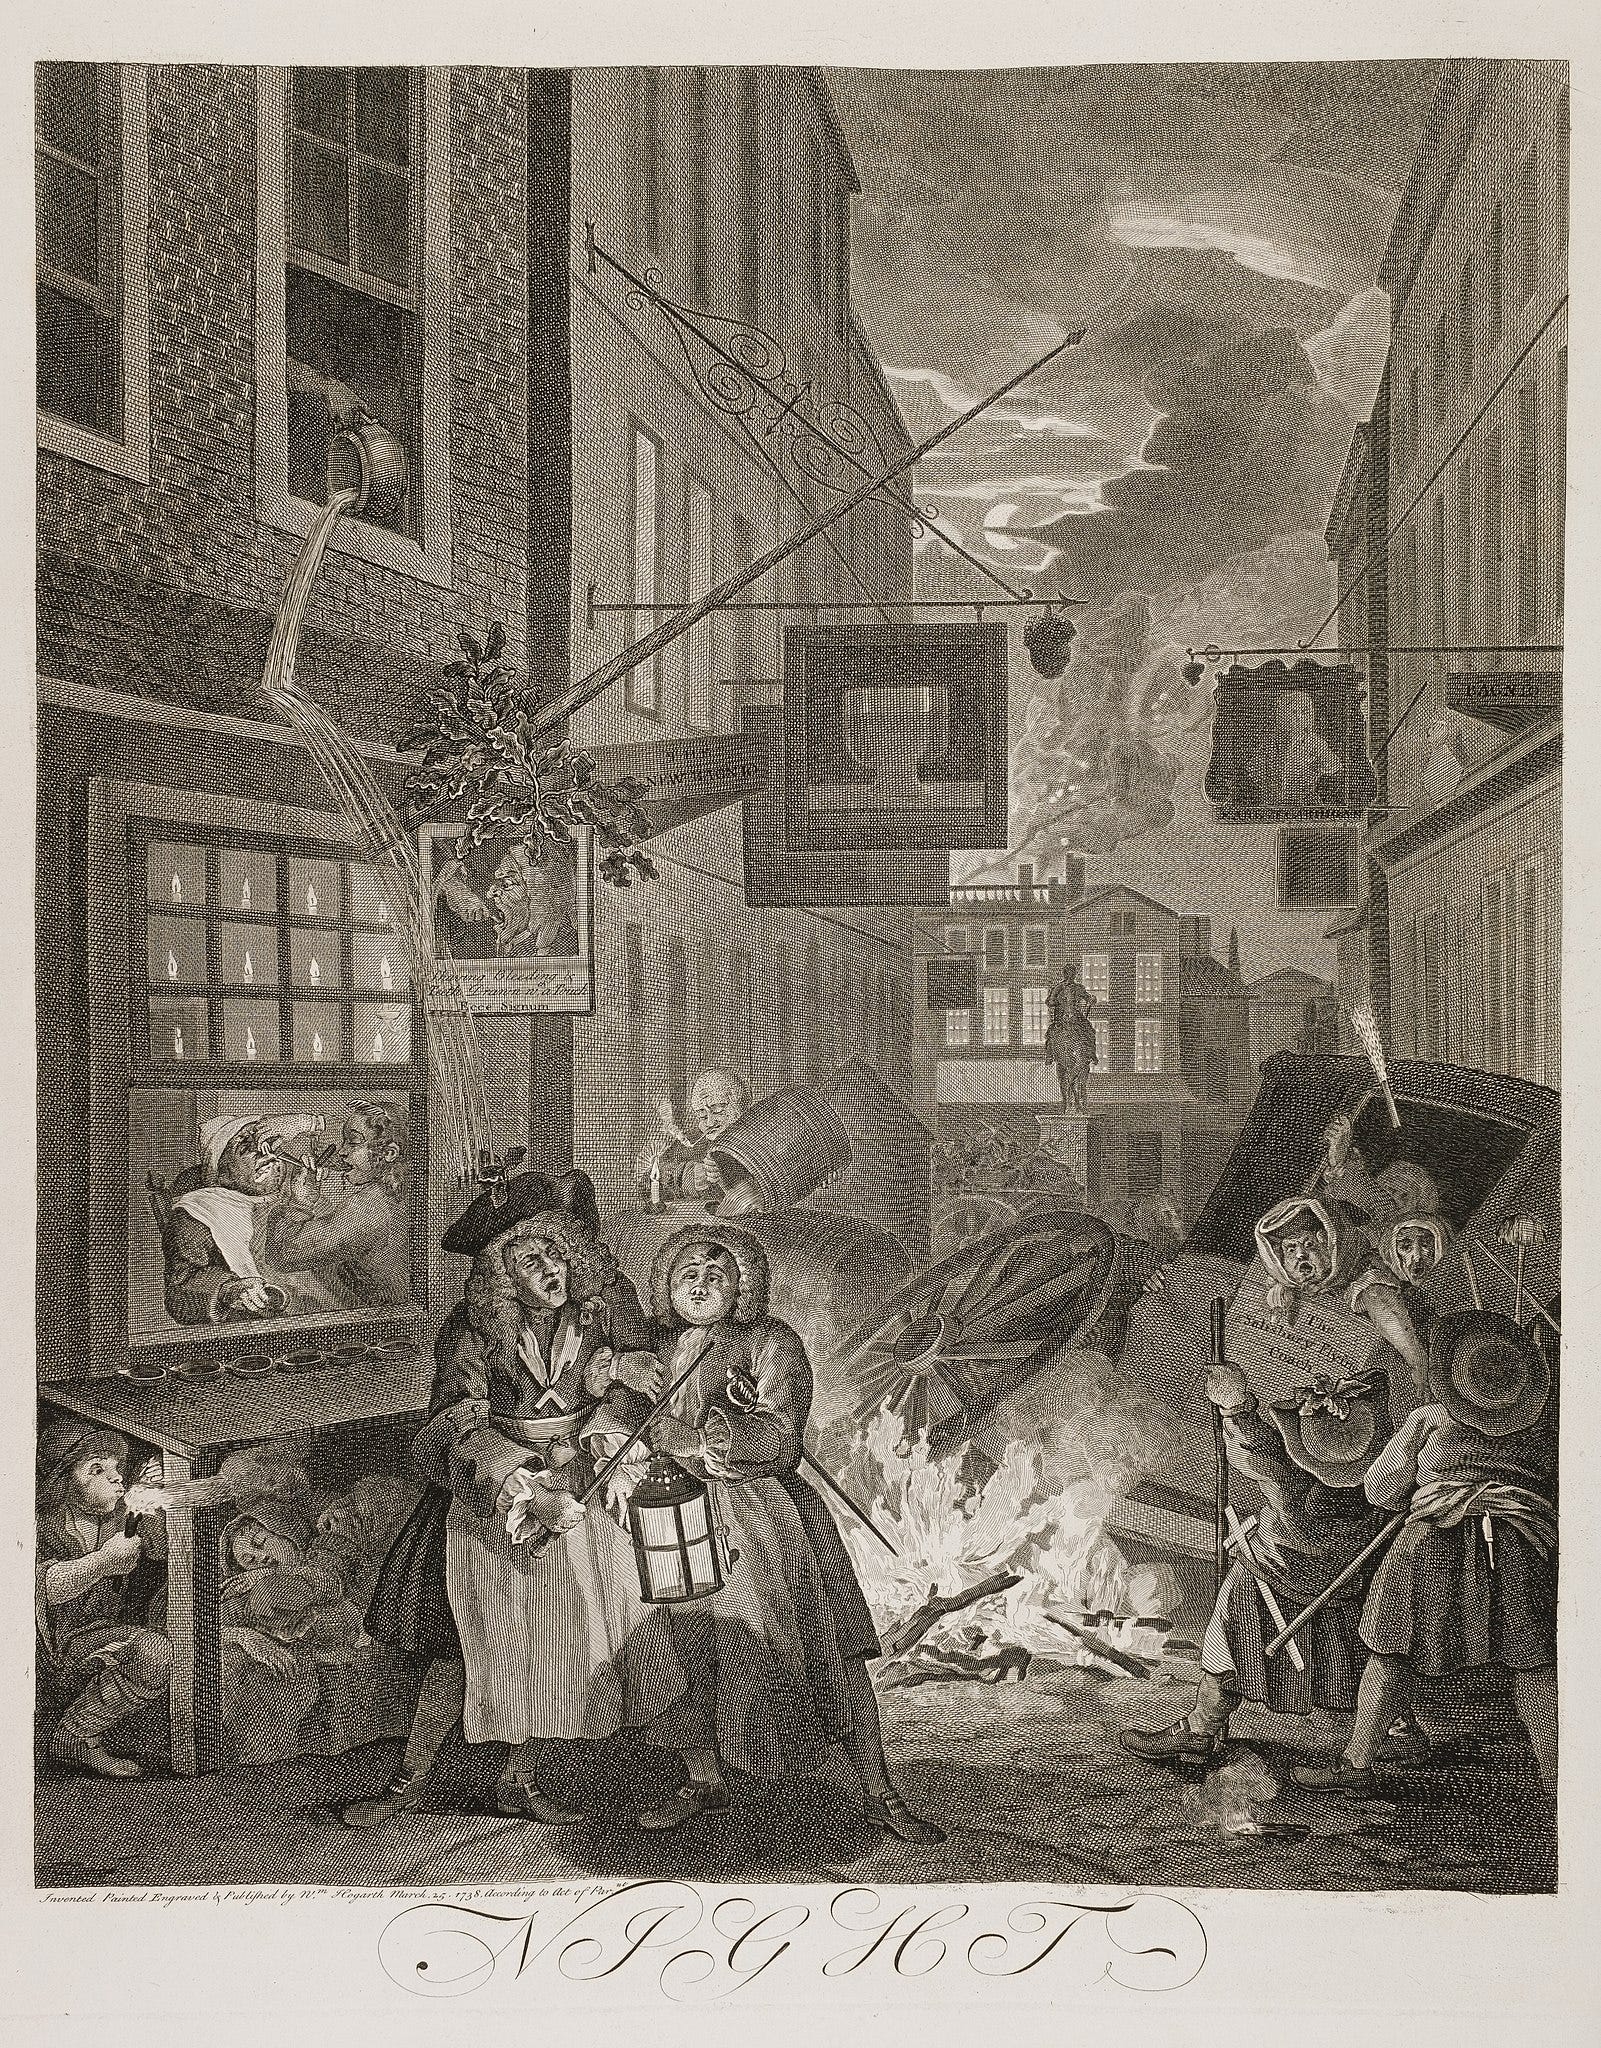 City scene at night set in street with drunks, business signs, overturned carriage, people living under crude shelter, drunken men with lantern